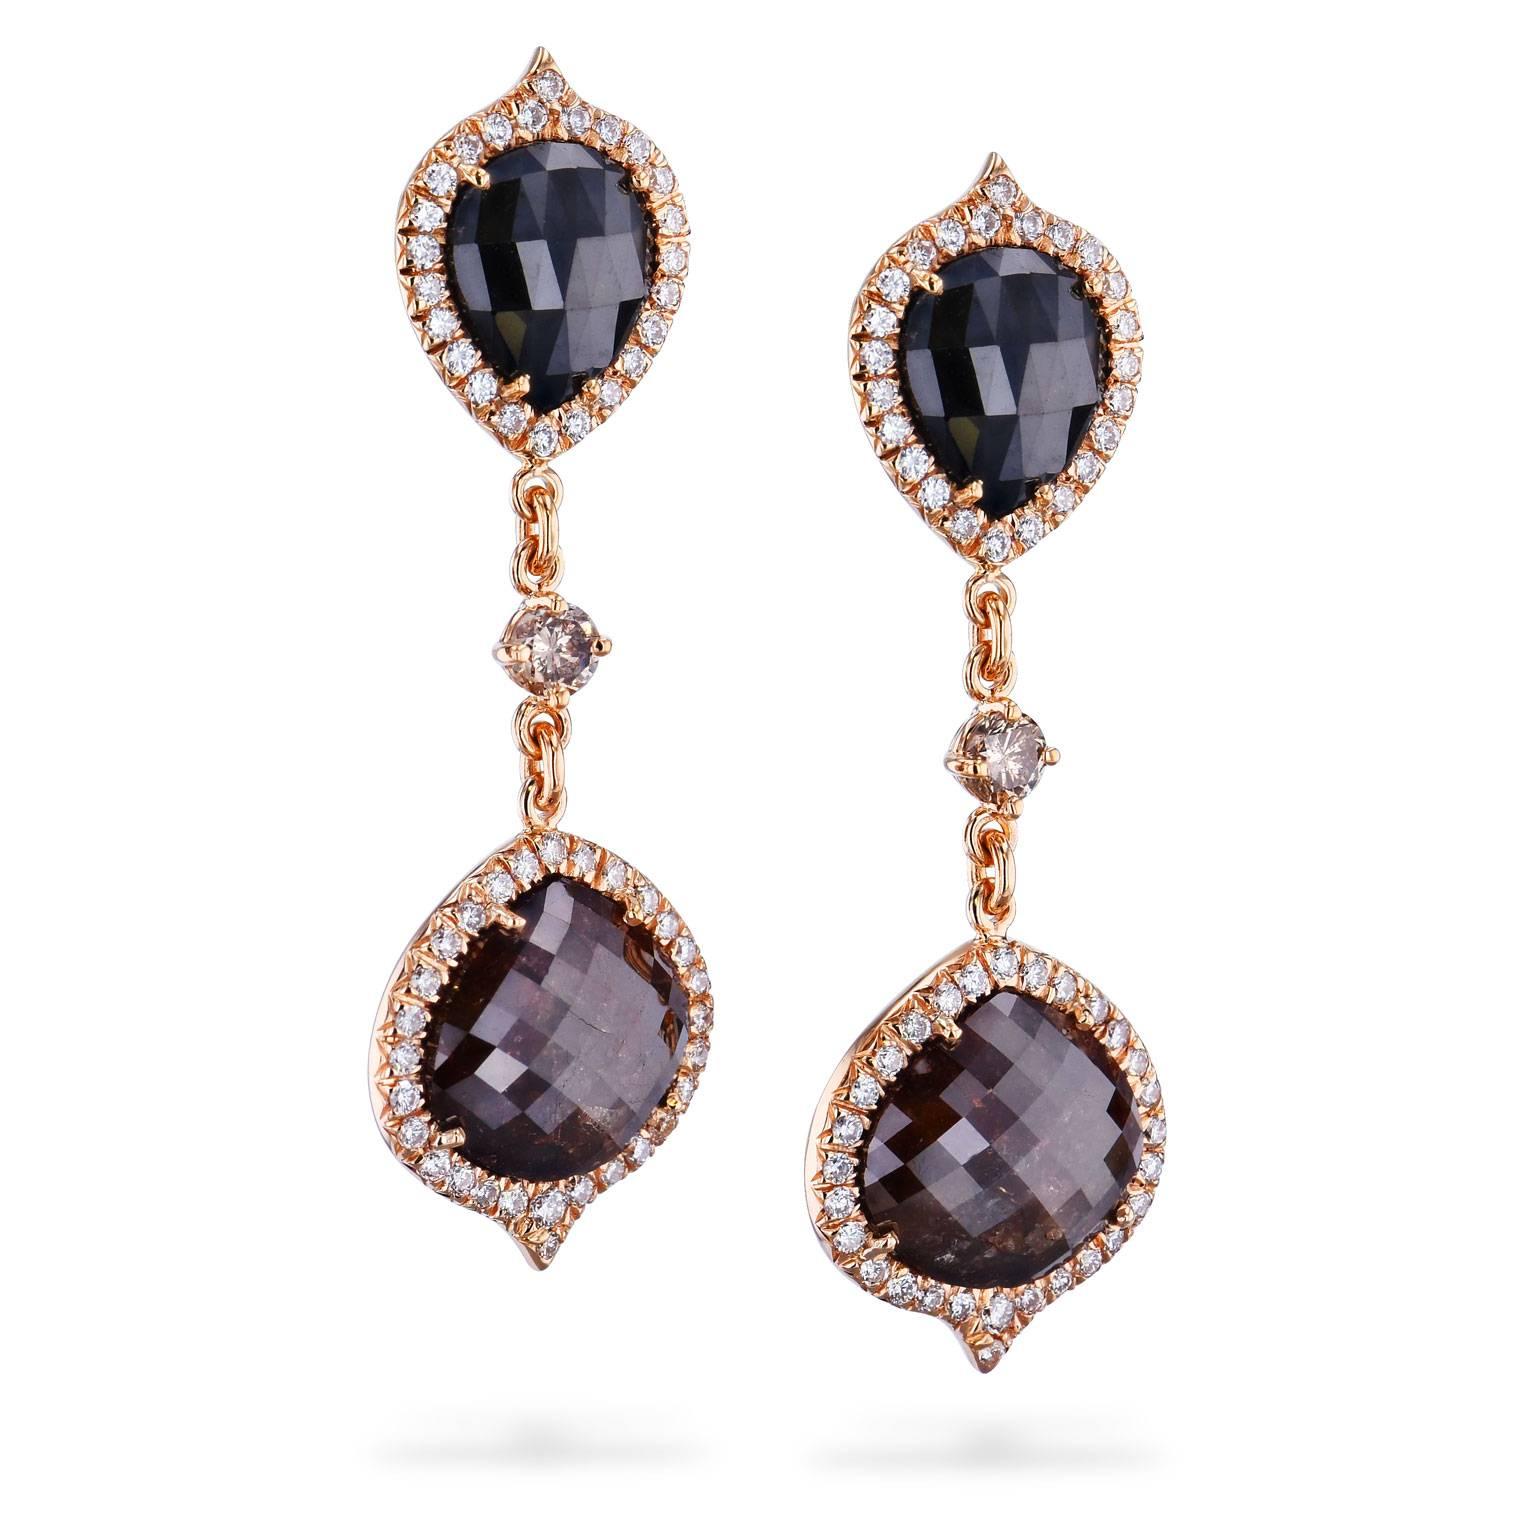 13.56 carat Black and Brown Diamonds with .91 carat Pave White Diamonds Earrings

13.56 carat of black and brown diamonds are embraced by 0.91 carat of pave-set diamond in these one-of-a-kind earrings. 
Hues of brown and black meld together,